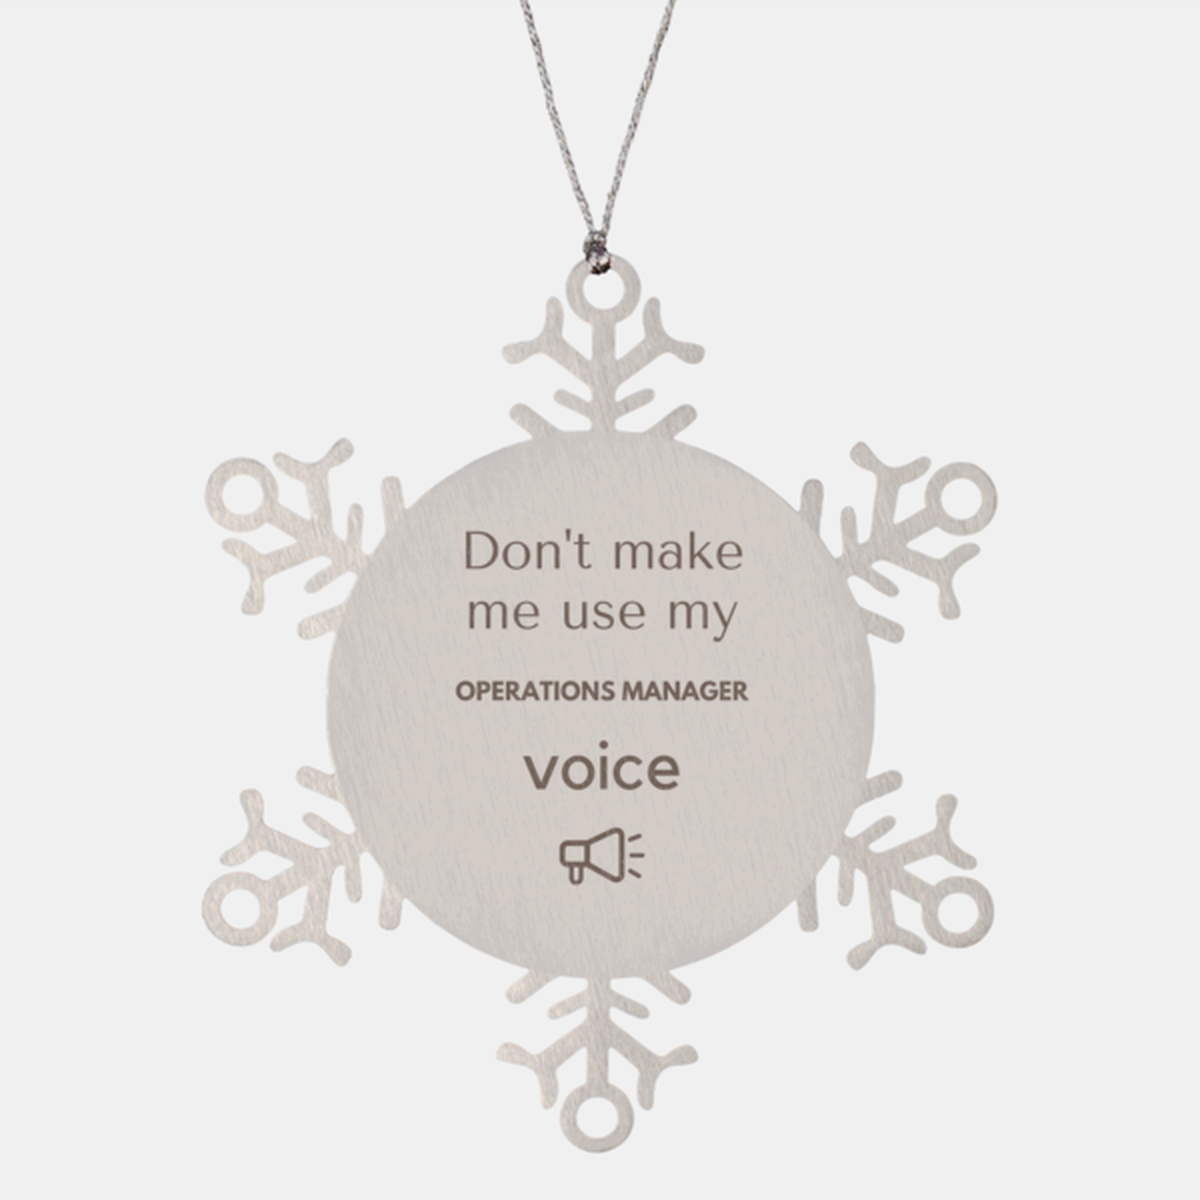 Don't make me use my Operations Manager voice, Sarcasm Operations Manager Ornament Gifts, Christmas Operations Manager Snowflake Ornament Unique Gifts For Operations Manager Coworkers, Men, Women, Colleague, Friends